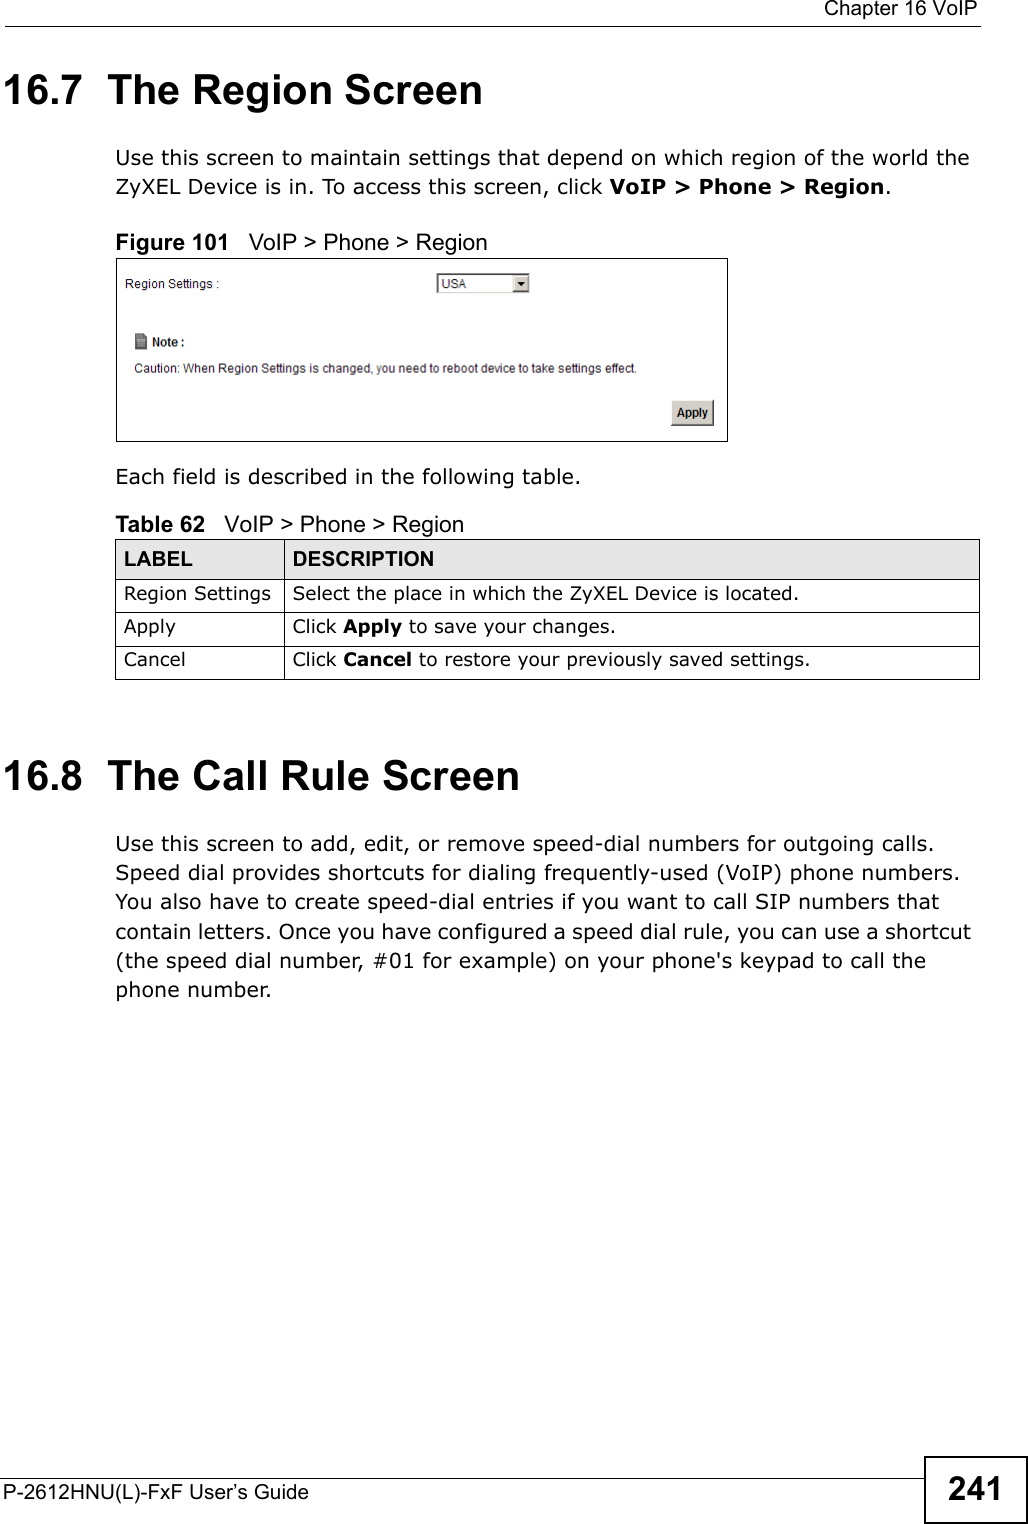  Chapter 16 VoIPP-2612HNU(L)-FxF User’s Guide 24116.7  The Region Screen Use this screen to maintain settings that depend on which region of the world theZyXEL Device is in. To access this screen, click VoIP &gt; Phone &gt; Region.Figure 101   VoIP &gt; Phone &gt; RegionEach field is described in the following table.16.8  The Call Rule ScreenUse this screen to add, edit, or remove speed-dial numbers for outgoing calls. Speed dial provides shortcuts for dialing frequently-used (VoIP) phone numbers.You also have to create speed-dial entries if you want to call SIP numbers thatcontain letters. Once you have configured a speed dial rule, you can use a shortcut(the speed dial number, #01 for example) on your phone&apos;s keypad to call the phone number.Table 62   VoIP &gt; Phone &gt; RegionLABEL DESCRIPTIONRegion Settings Select the place in which the ZyXEL Device is located.Apply Click Apply to save your changes.Cancel Click Cancel to restore your previously saved settings.